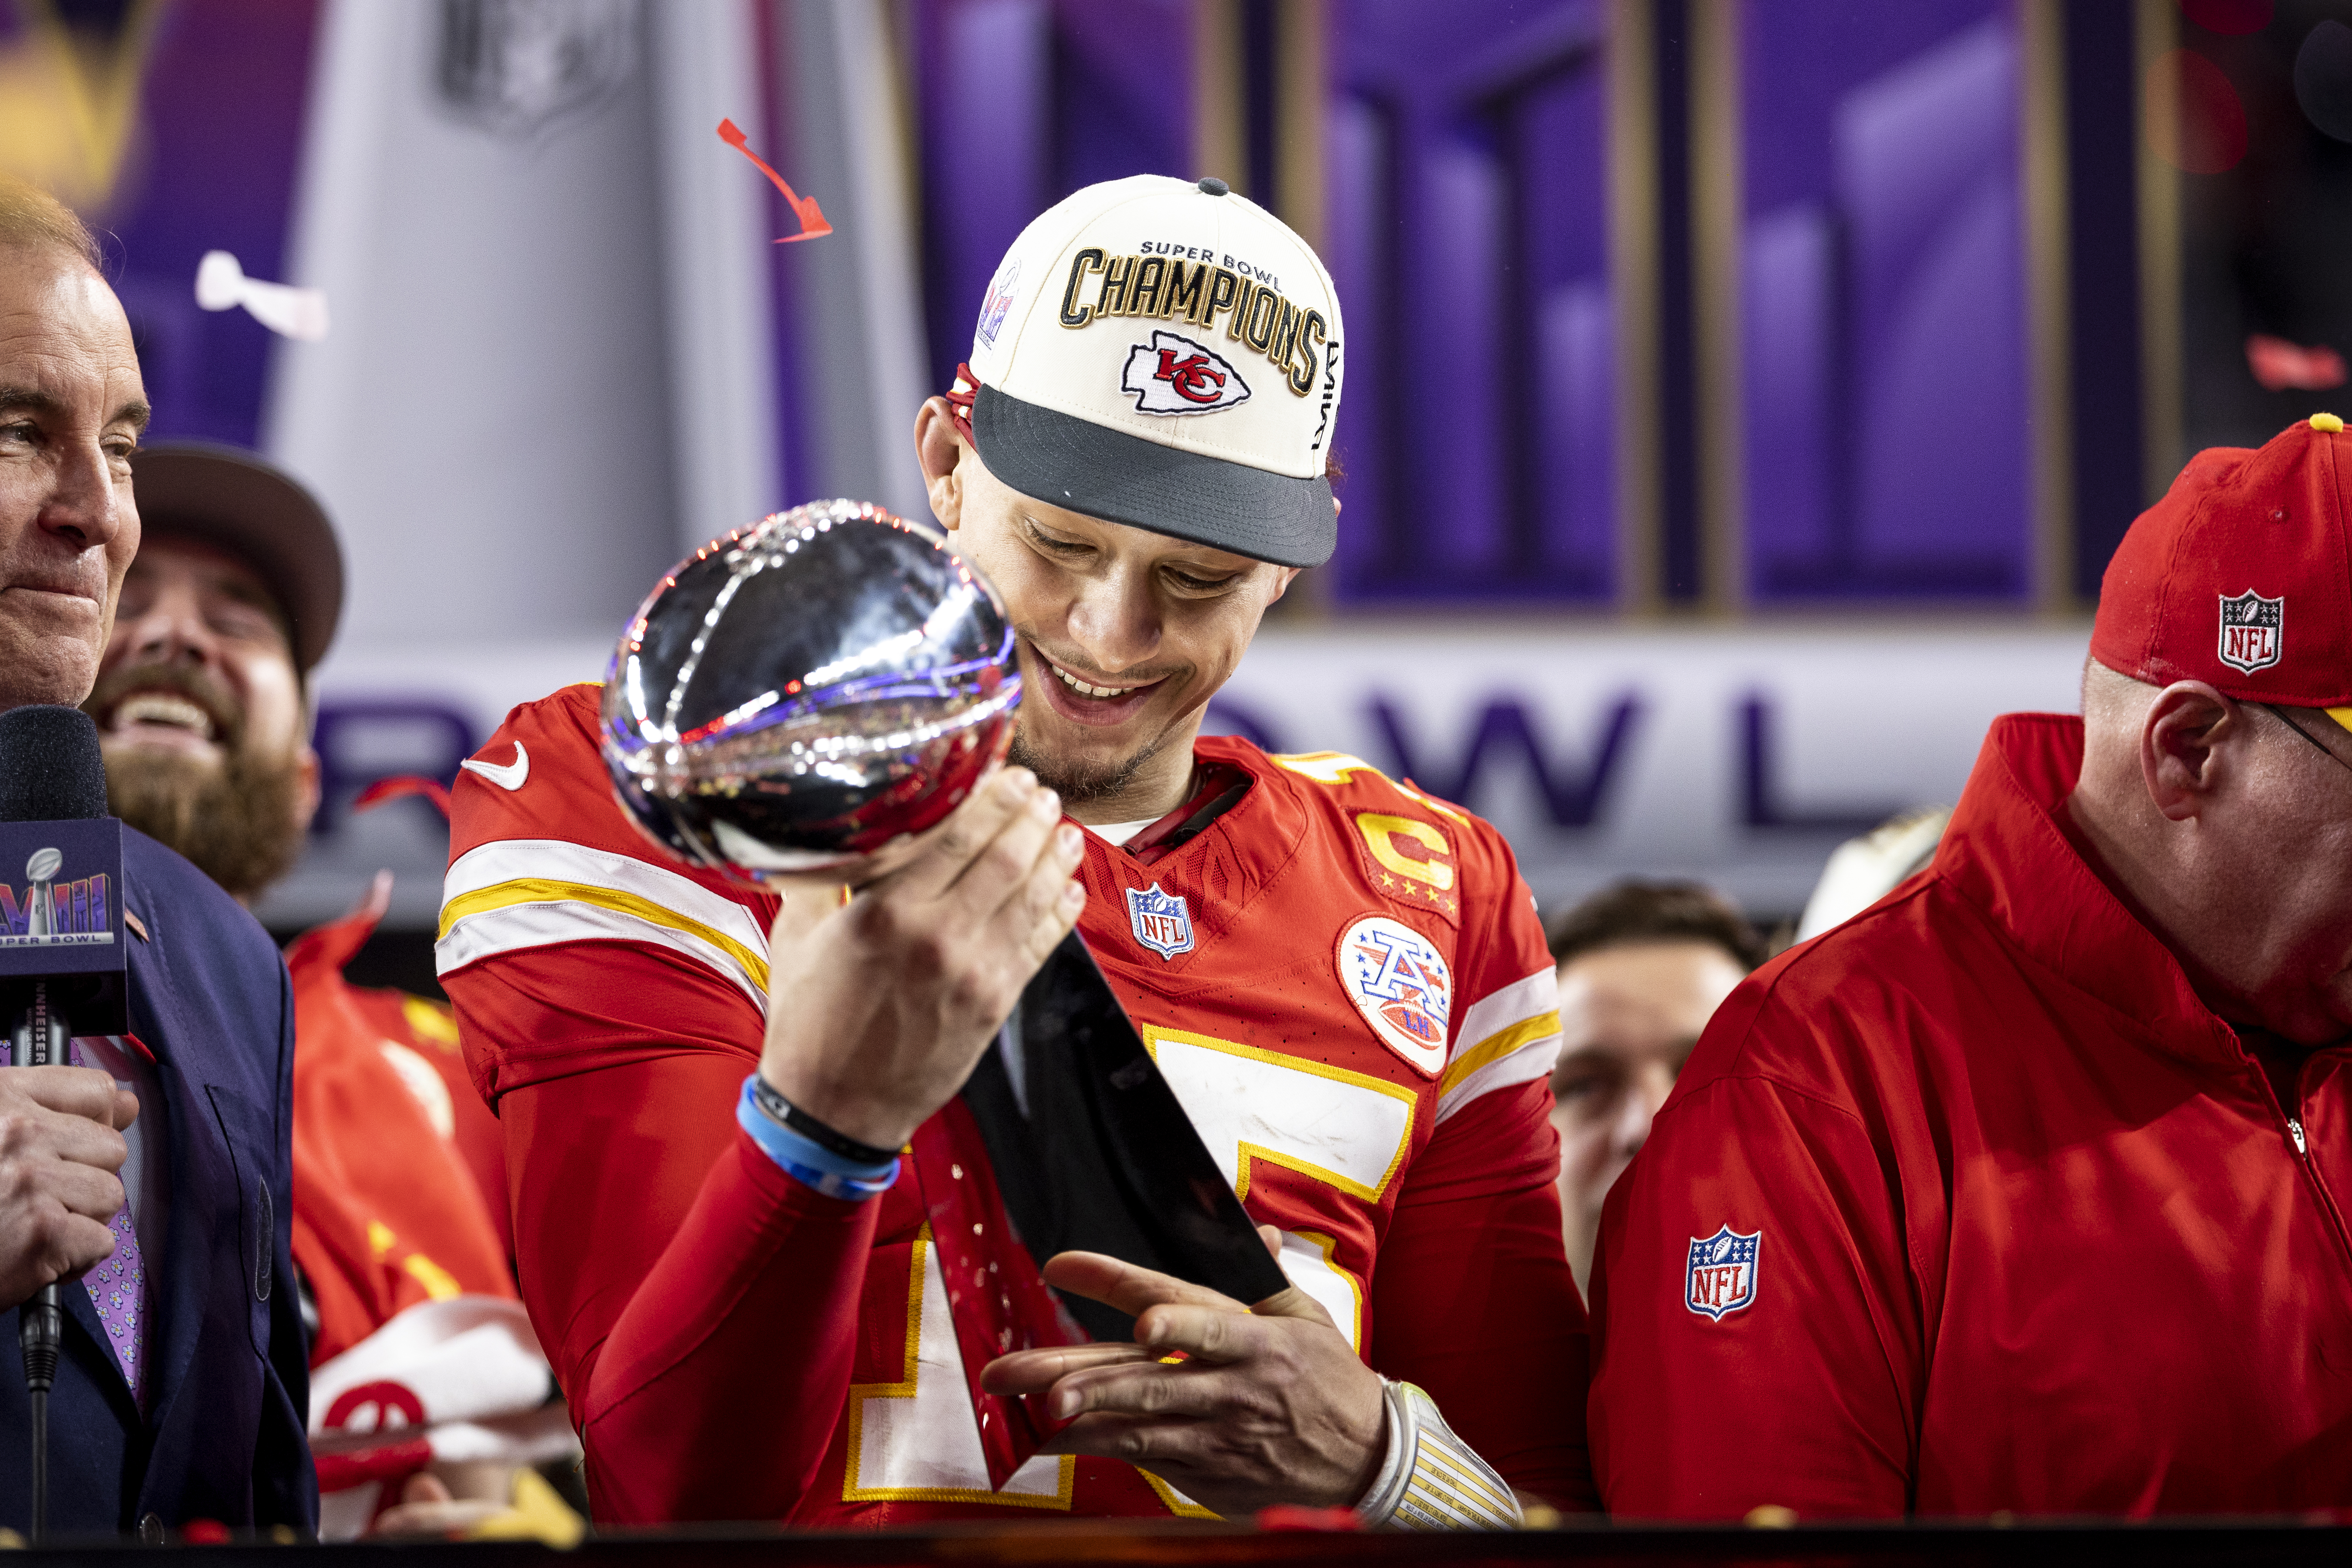 Patrick Mahomes #15 of the Kansas City Chiefs celebrates with the Vince Lombardi Trophy following the NFL Super Bowl 58 football game on February 11, 2024, in Las Vegas, Nevada. | Source: Getty Images